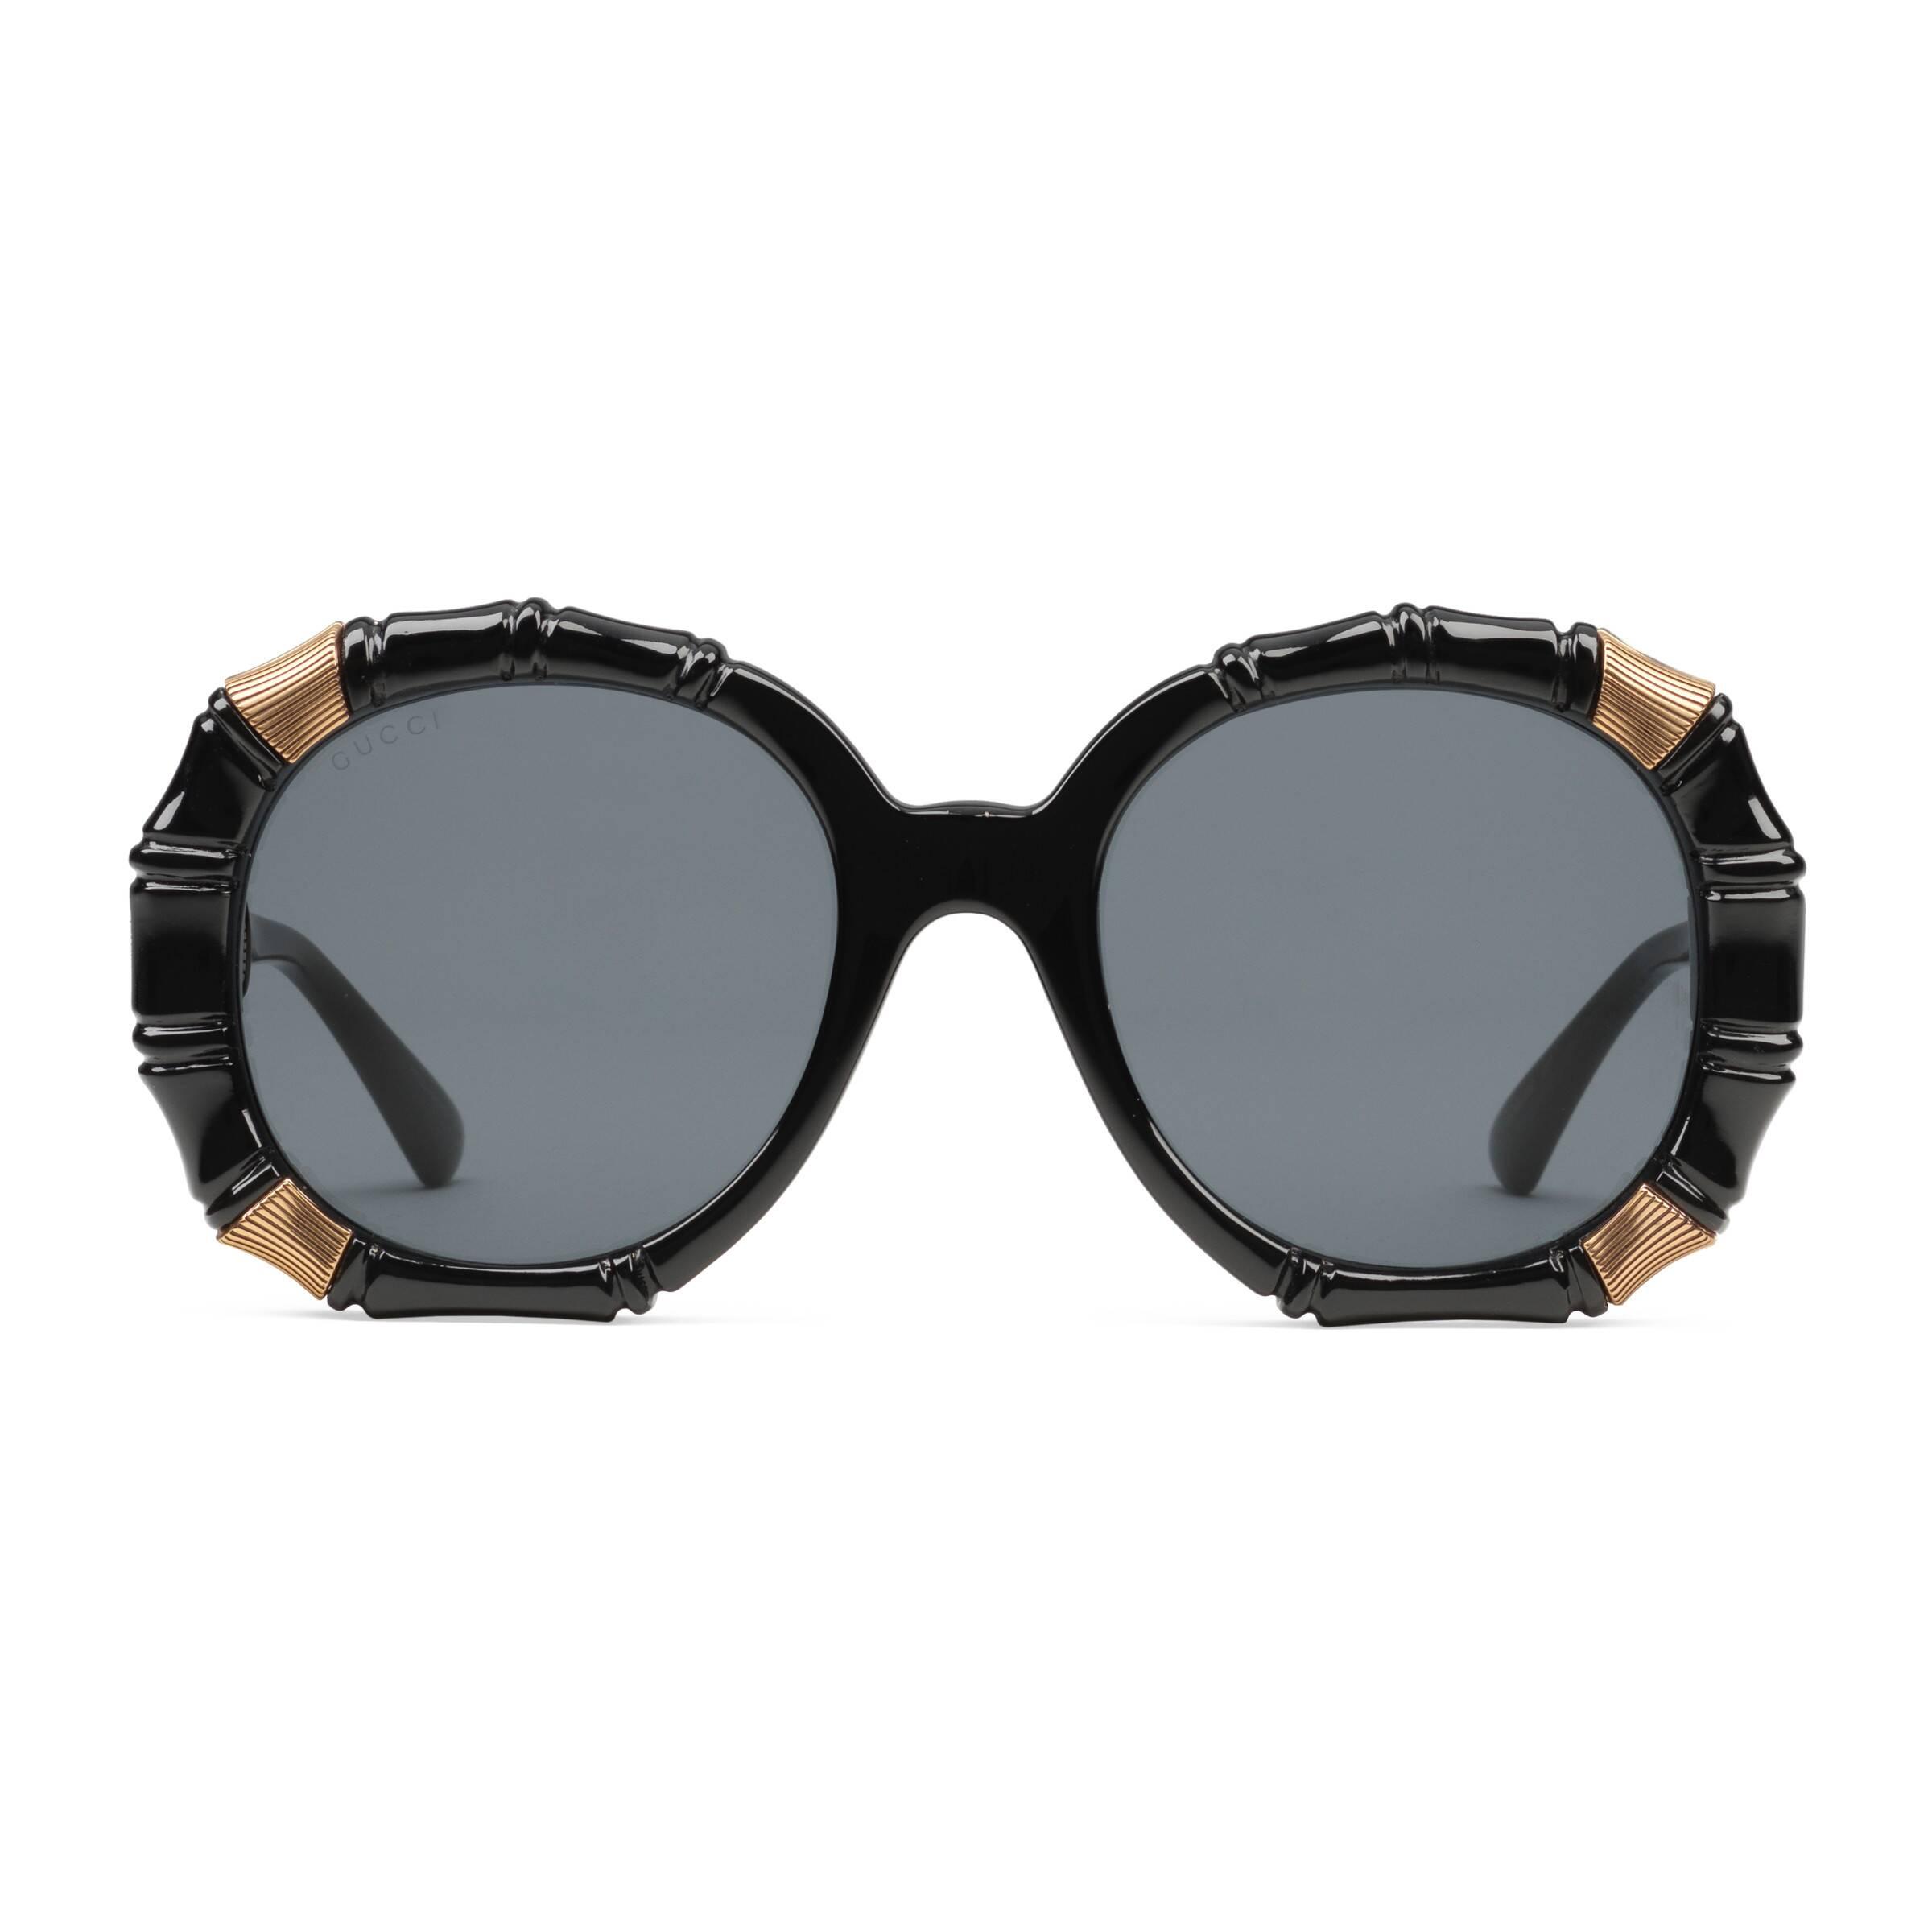 Gucci Bamboo Effect Round Sunglasses in Black | Lyst